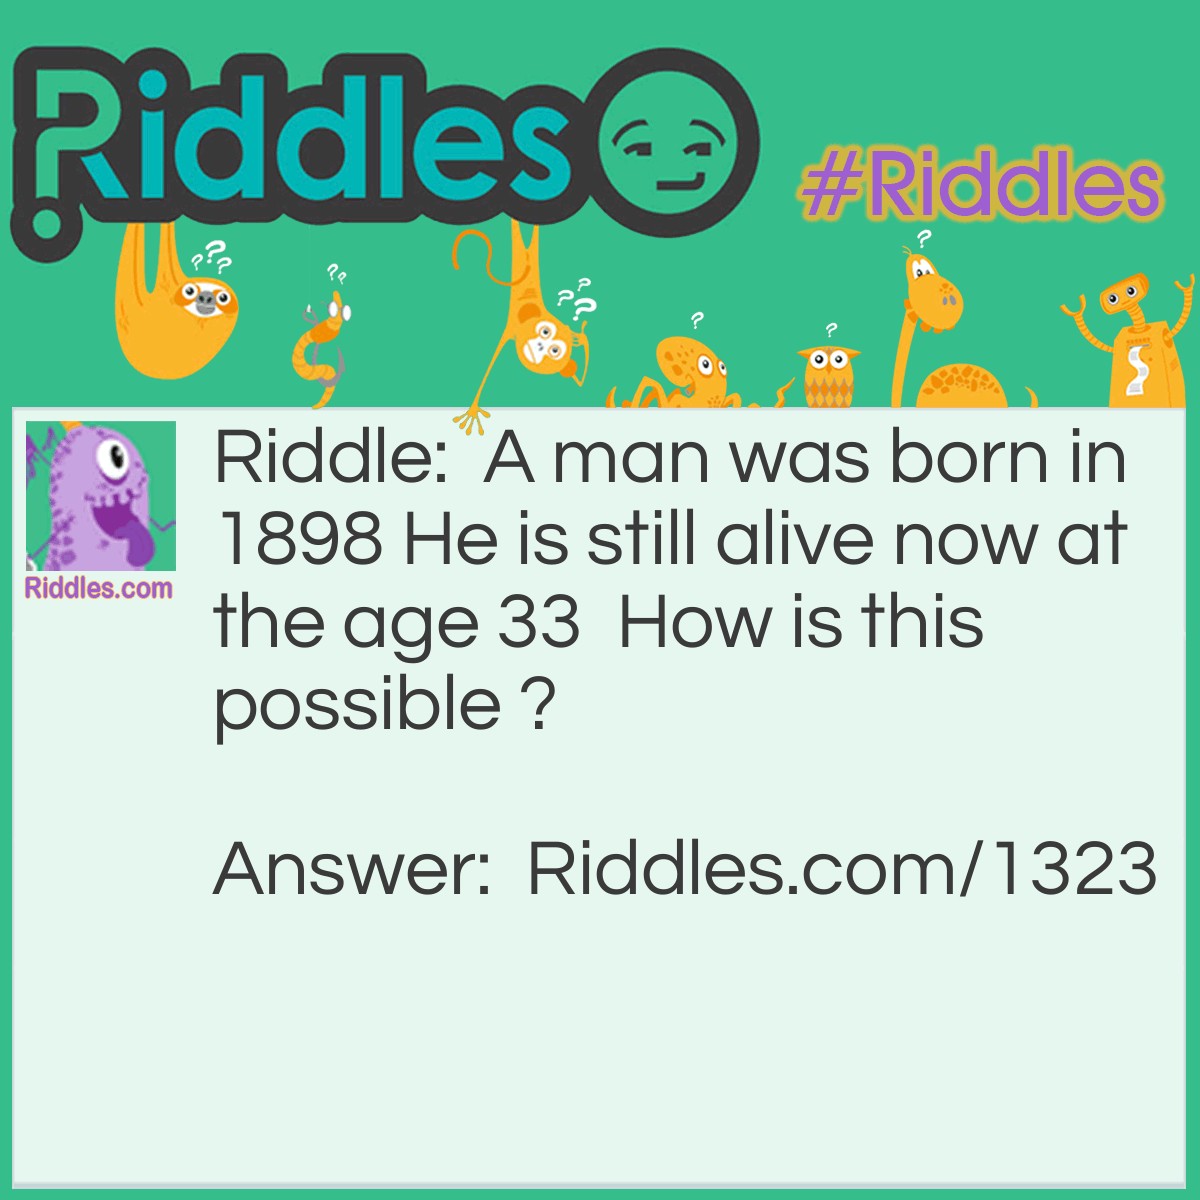 Riddle: A man was born in 1898 He is still alive now at the age 33  How is this possible ? Answer: he was born in room 1898 in the hospital